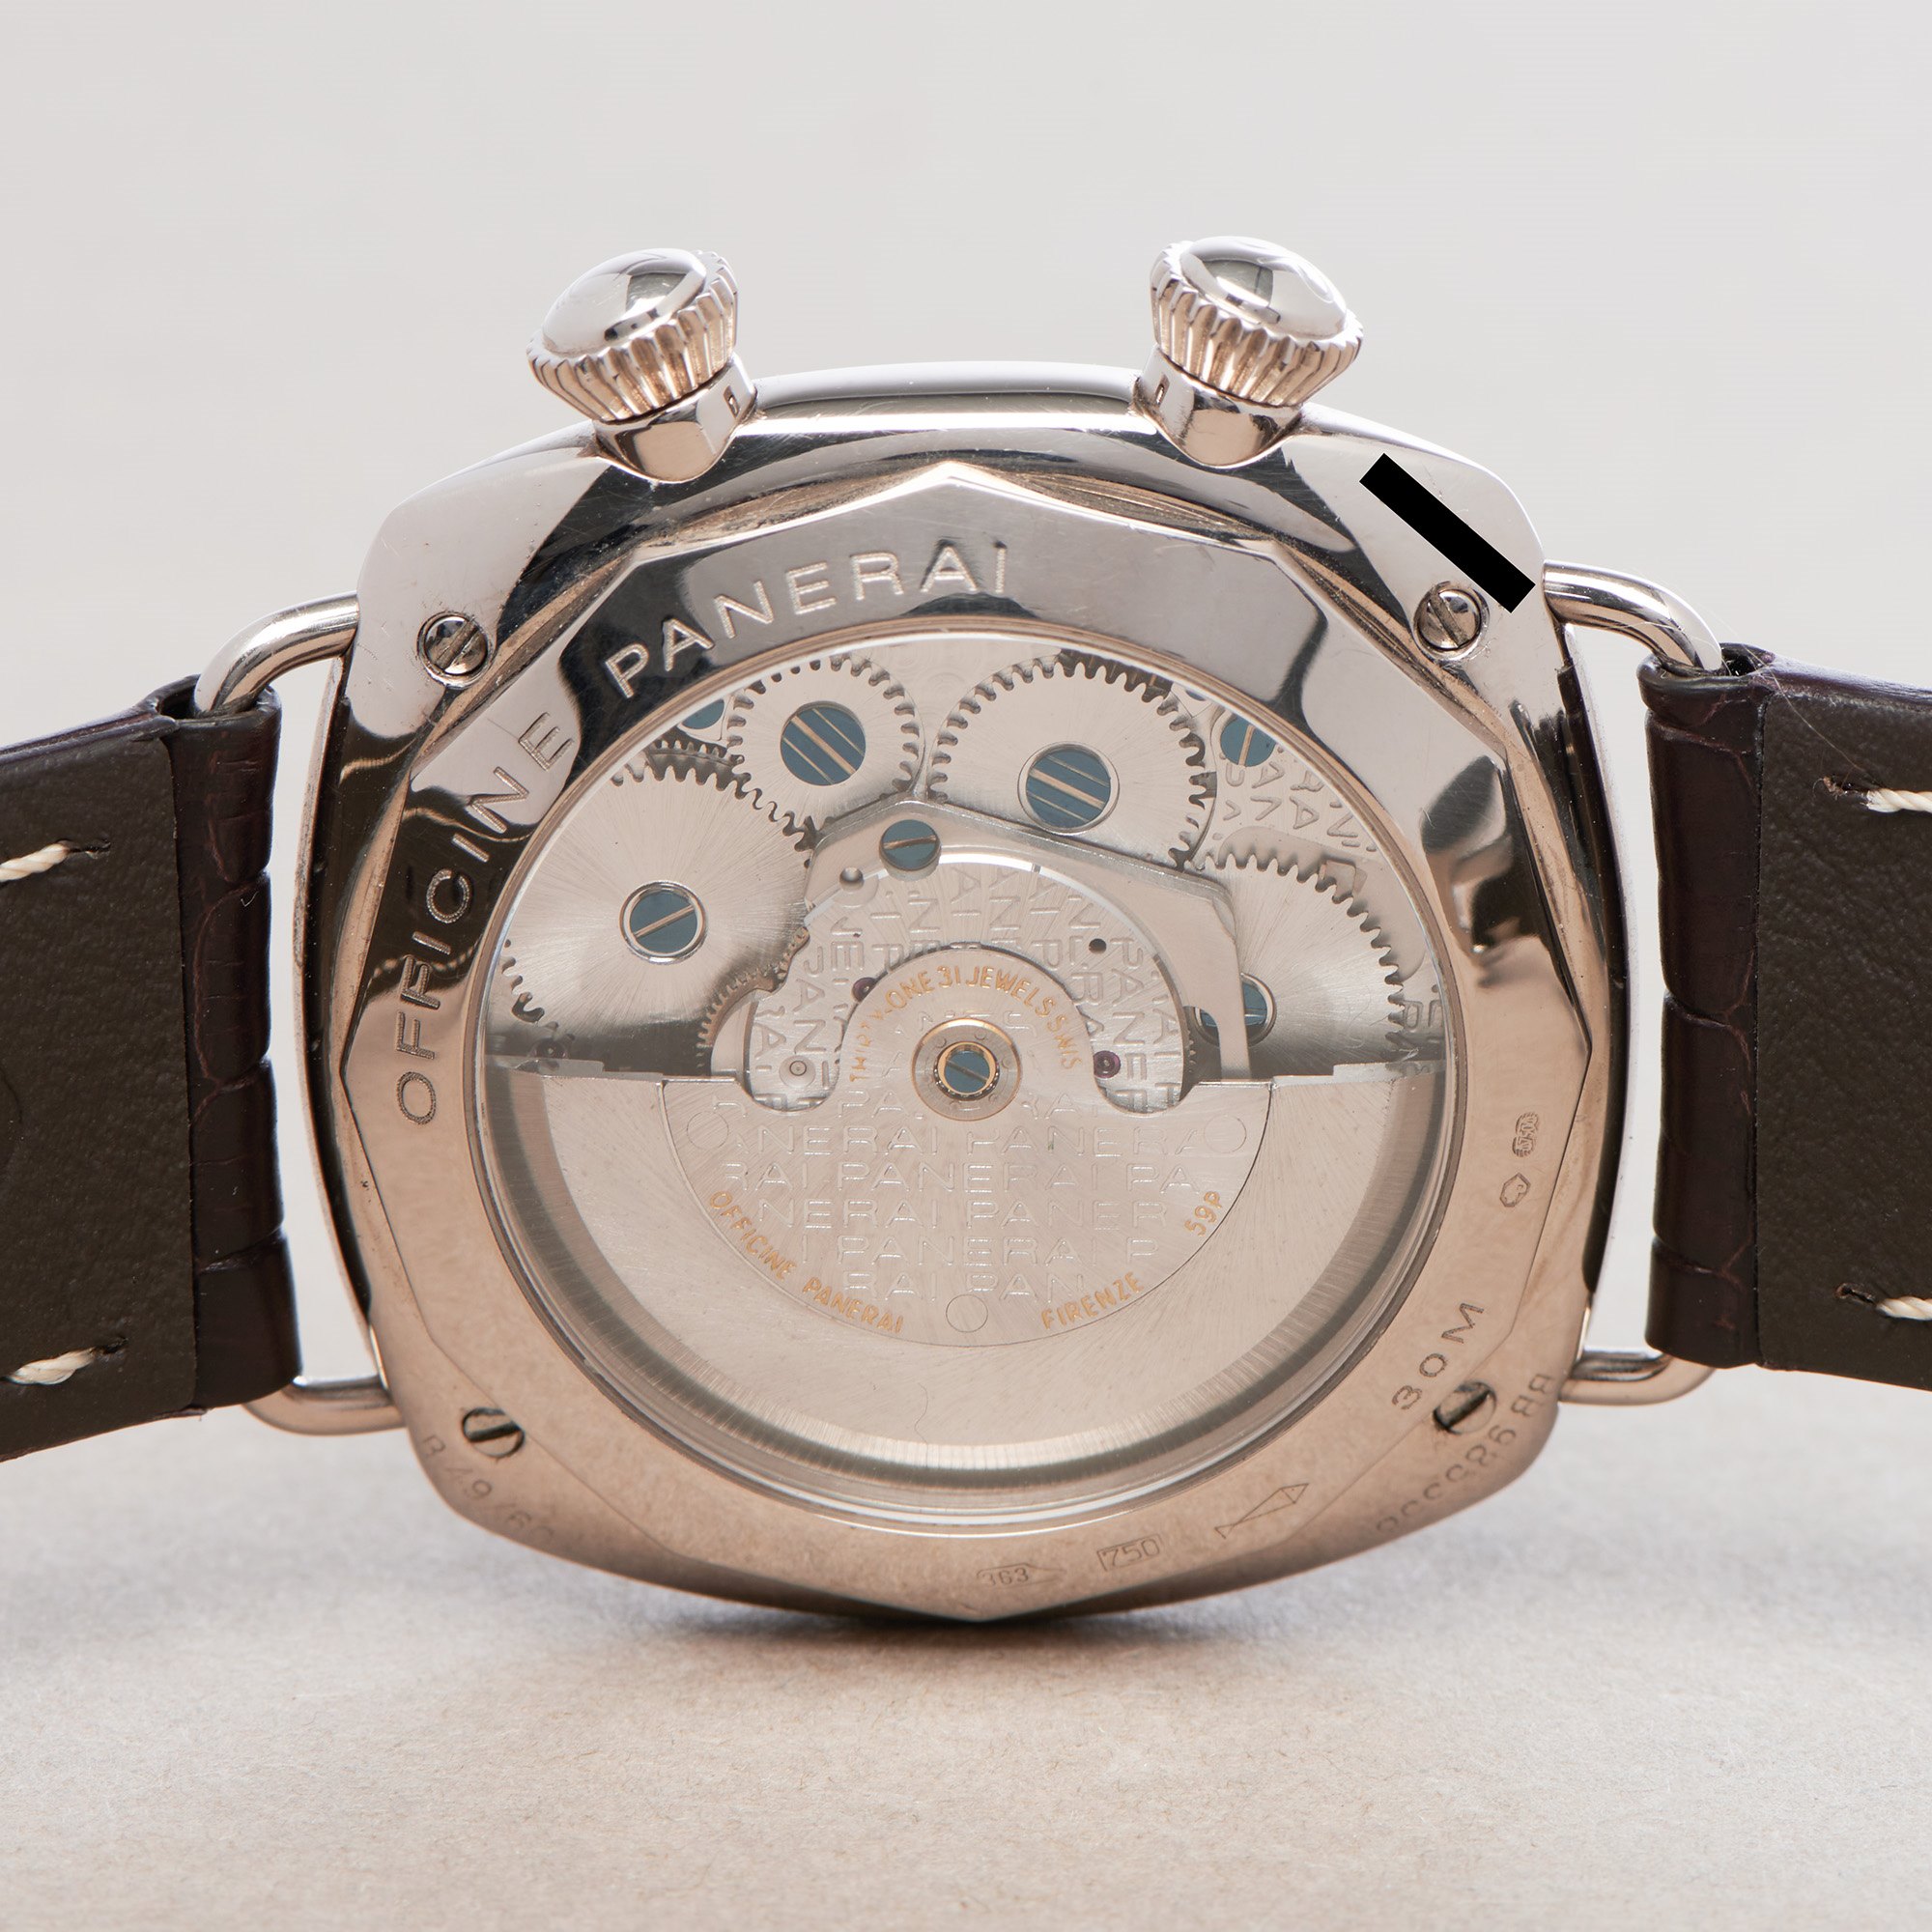 Panerai Radiomir Limited Edition of 60 Pieces 18K White Gold - PAM00046 White Gold PAM00046